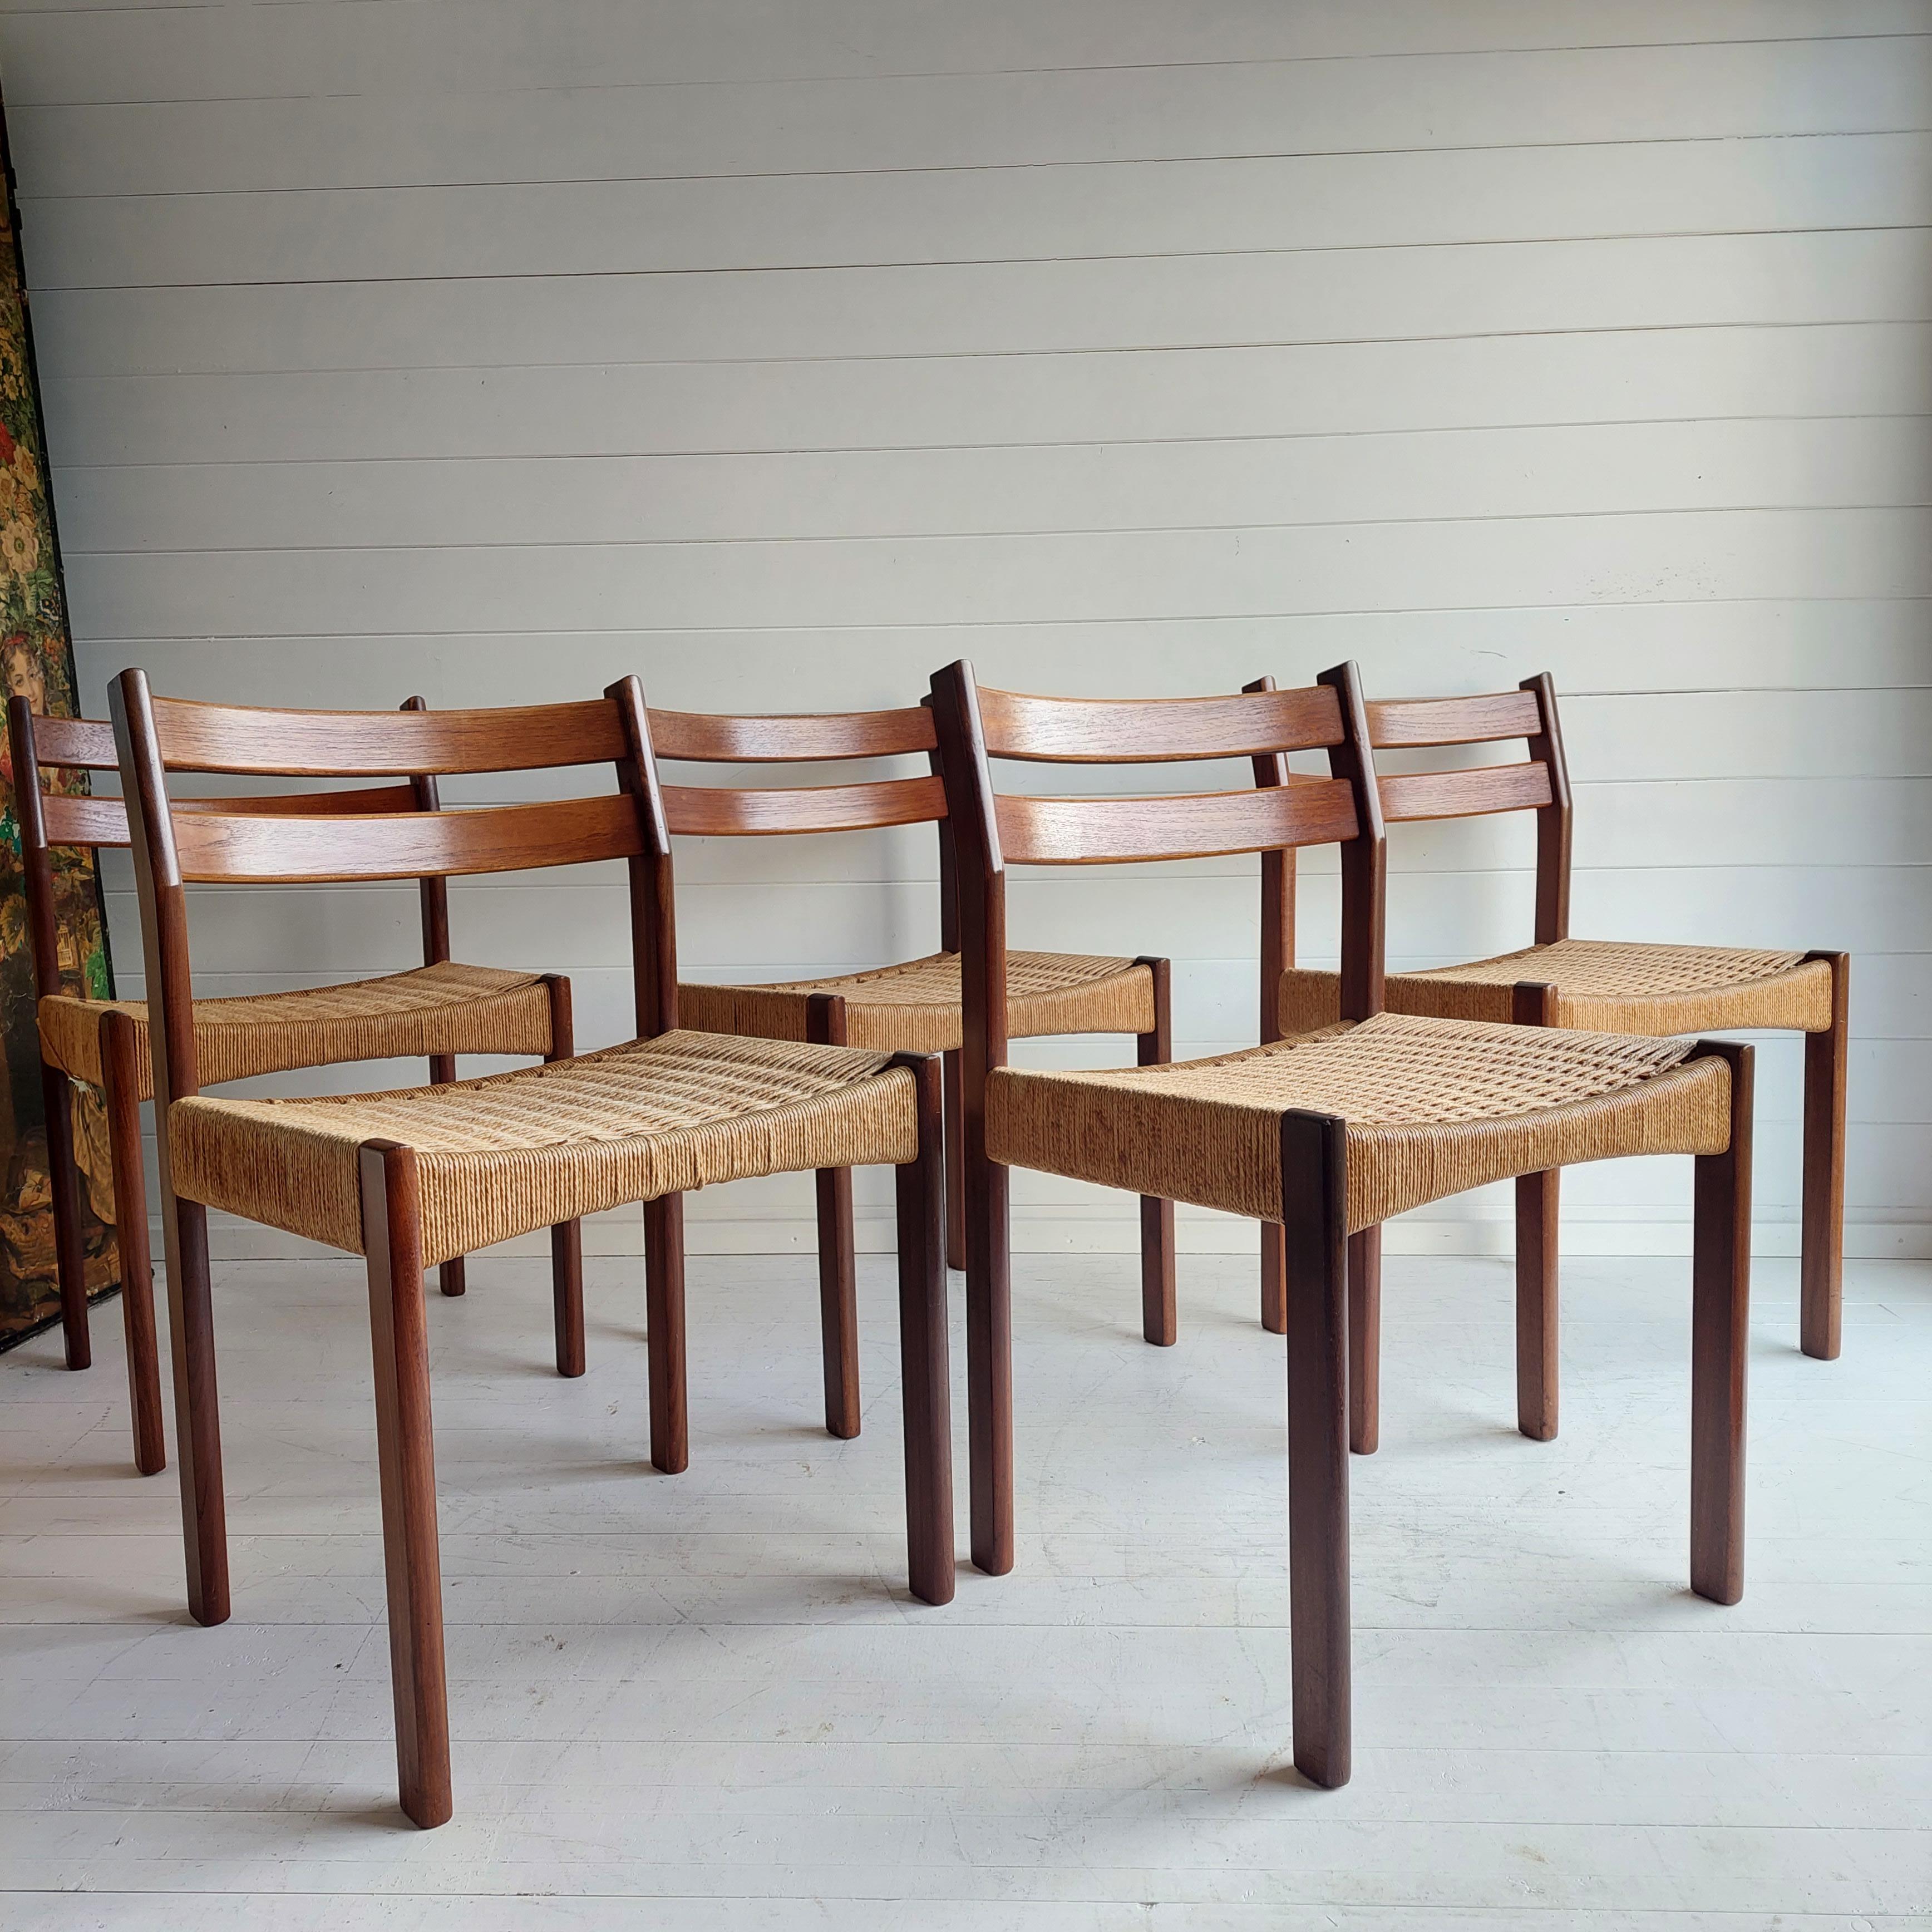 A 1960s set of five(plus 1) dining chairs, designed by Arne Hovmand Olsen and produced by Mogens Kold in Denmark.

Design Period - 1950 to 1969
This set of four (5) dining chairs was designed by Arne Hovmand Olsen and produced by Mogens Kold, in